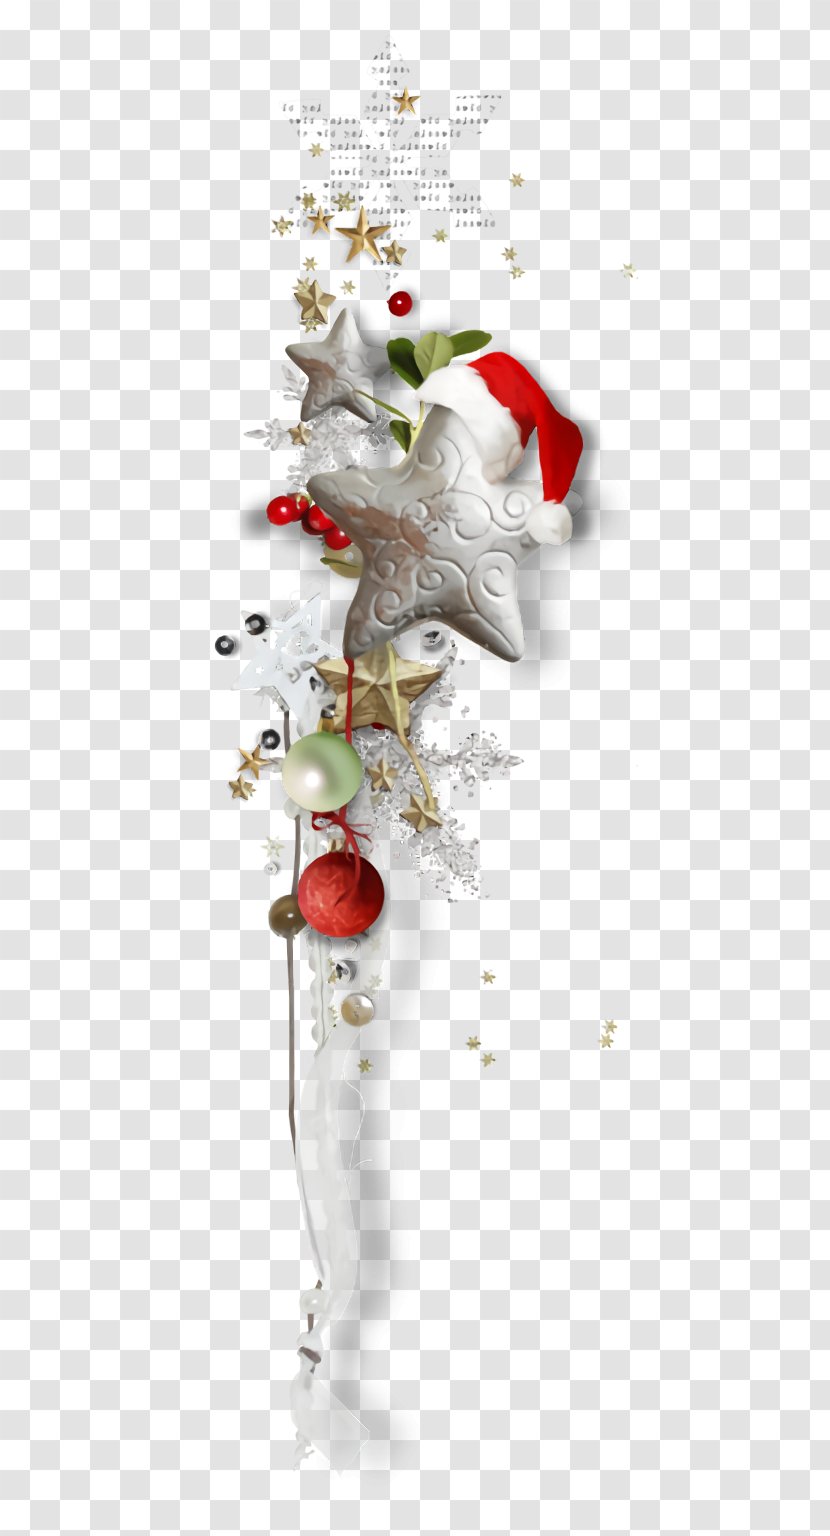 Christmas Ornaments Decoration - Holiday Ornament Holly Transparent PNG